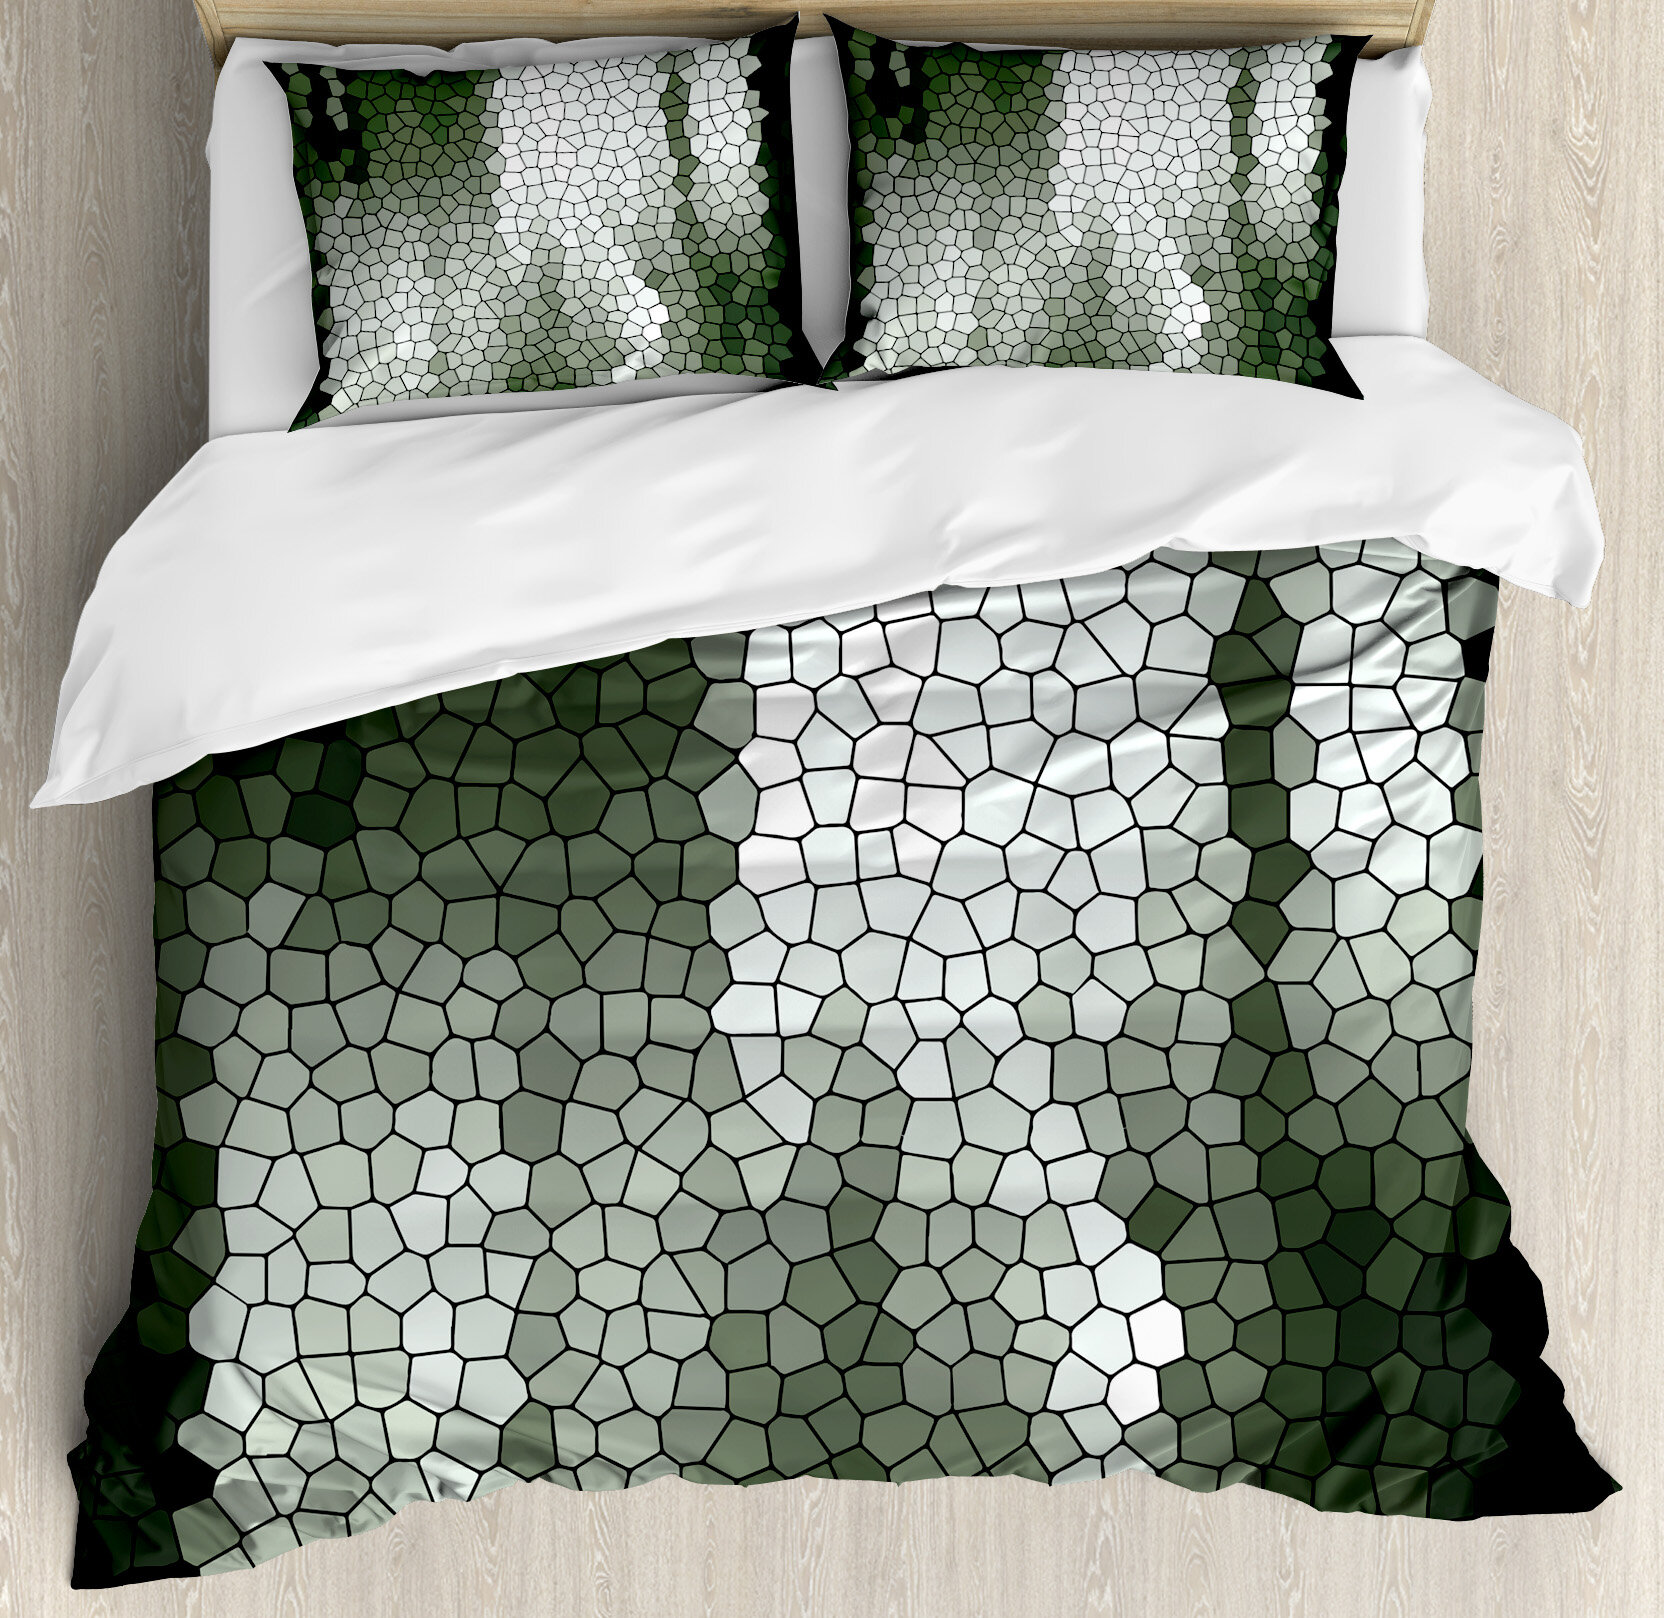 East Urban Home Abstract Artistic Mosaic Pattern Green And Tones